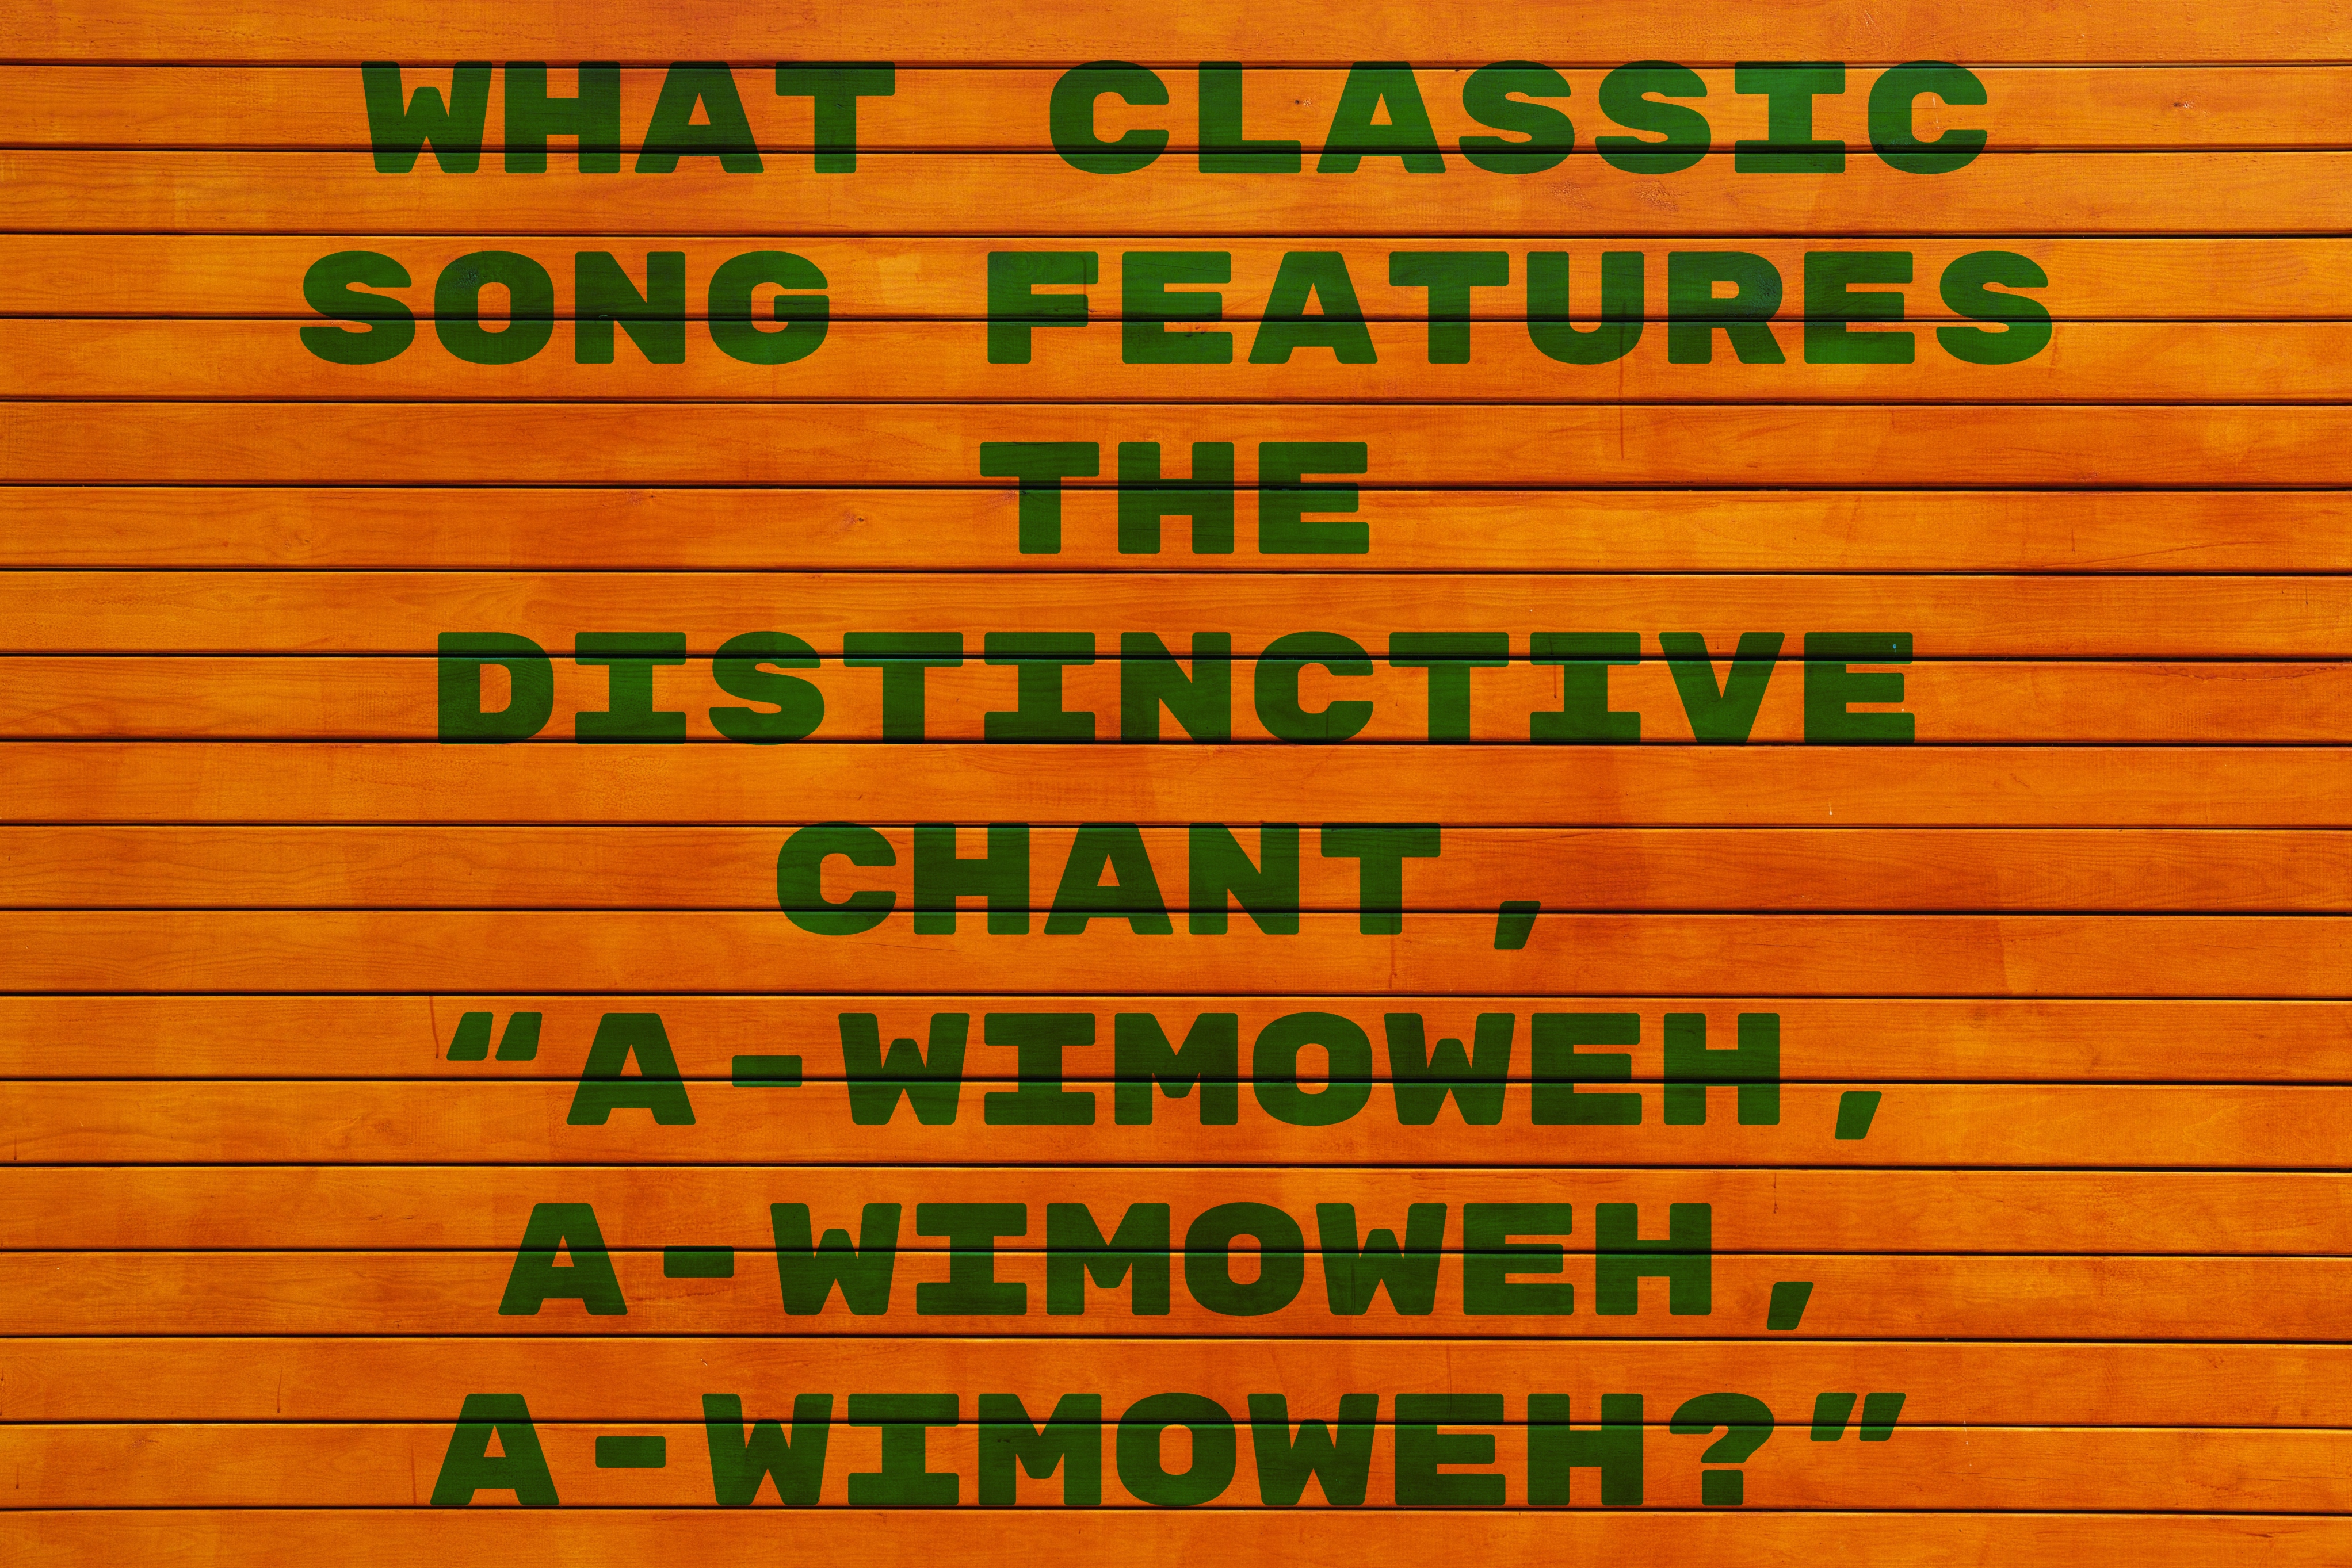 What Classic Song Features The Distinctive Chant, “A-Wimoweh, A-Wimoweh, A-Wimoweh?”